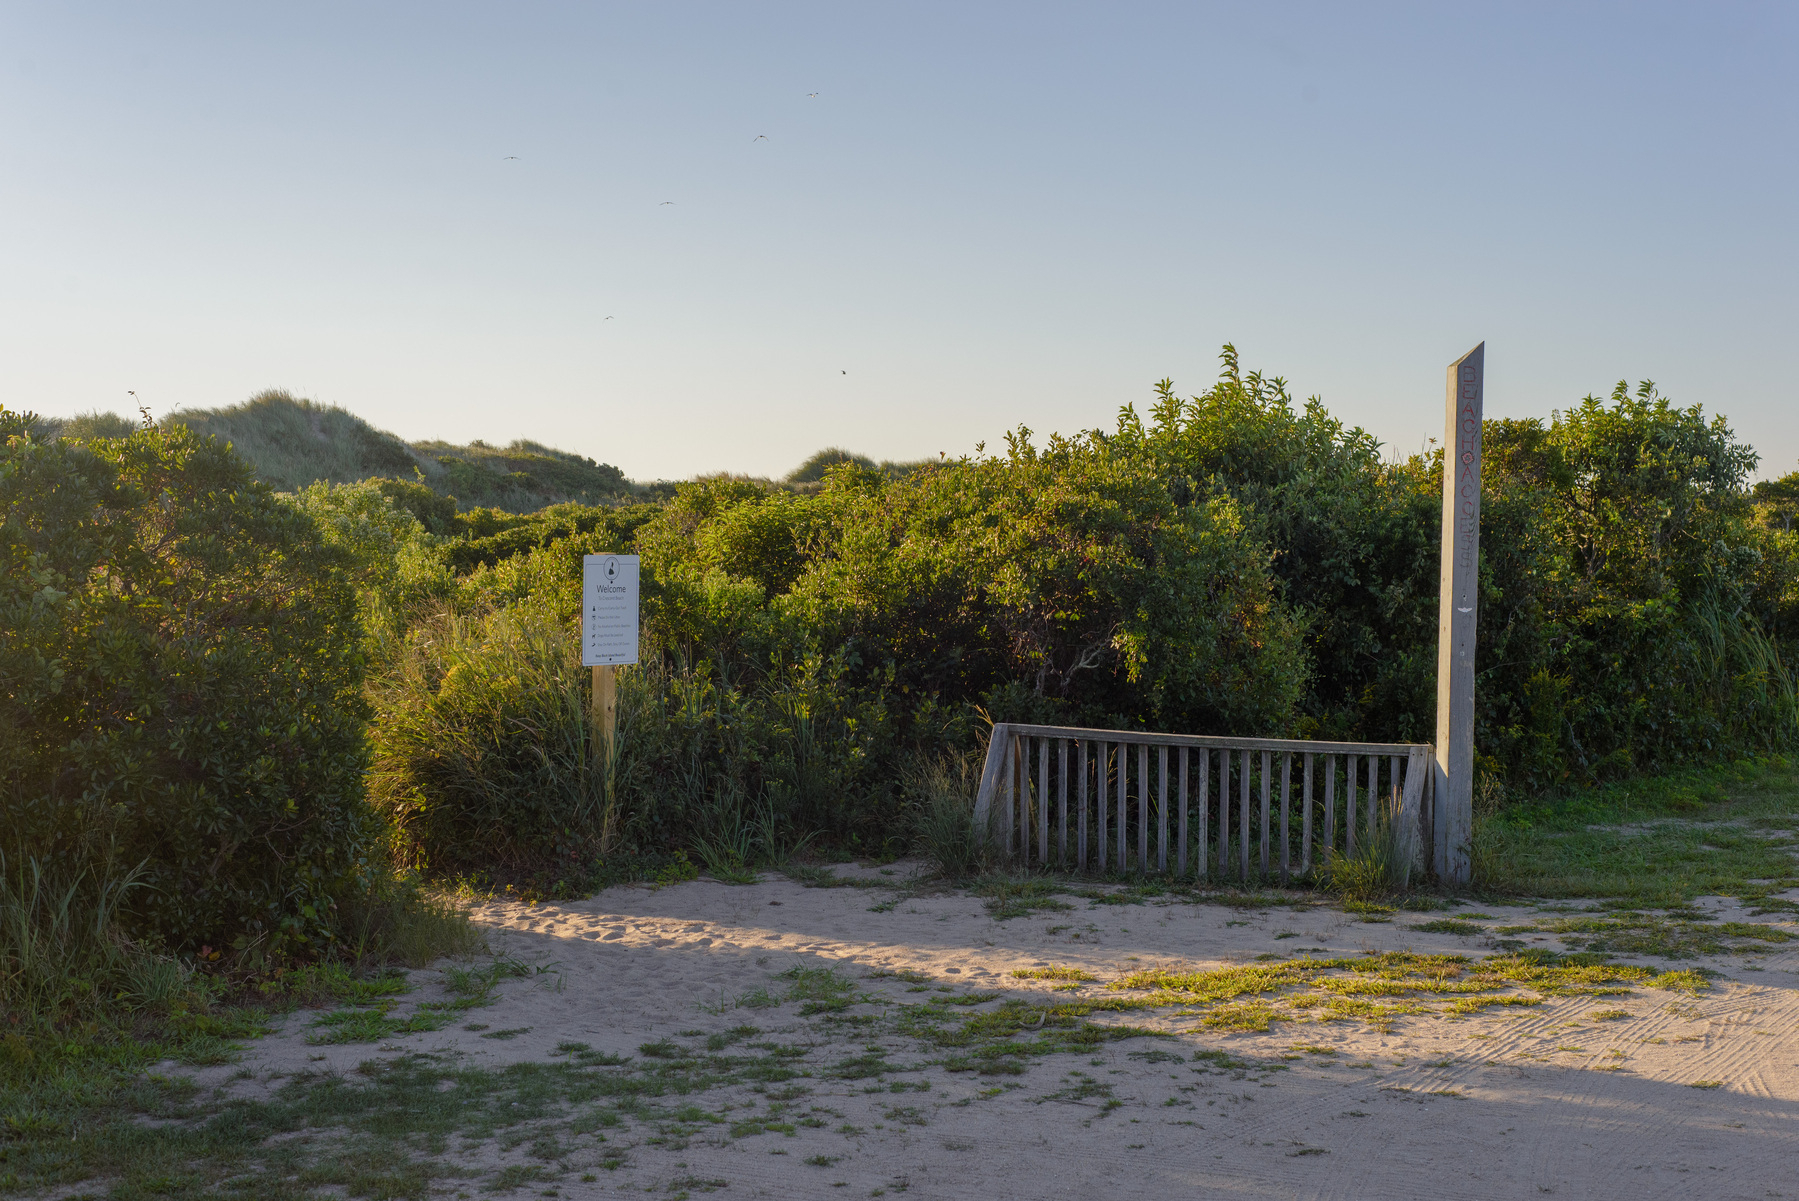 Landscape with wooden bike rack, marker post and sign in front of a trail access across the dunes to the beach.